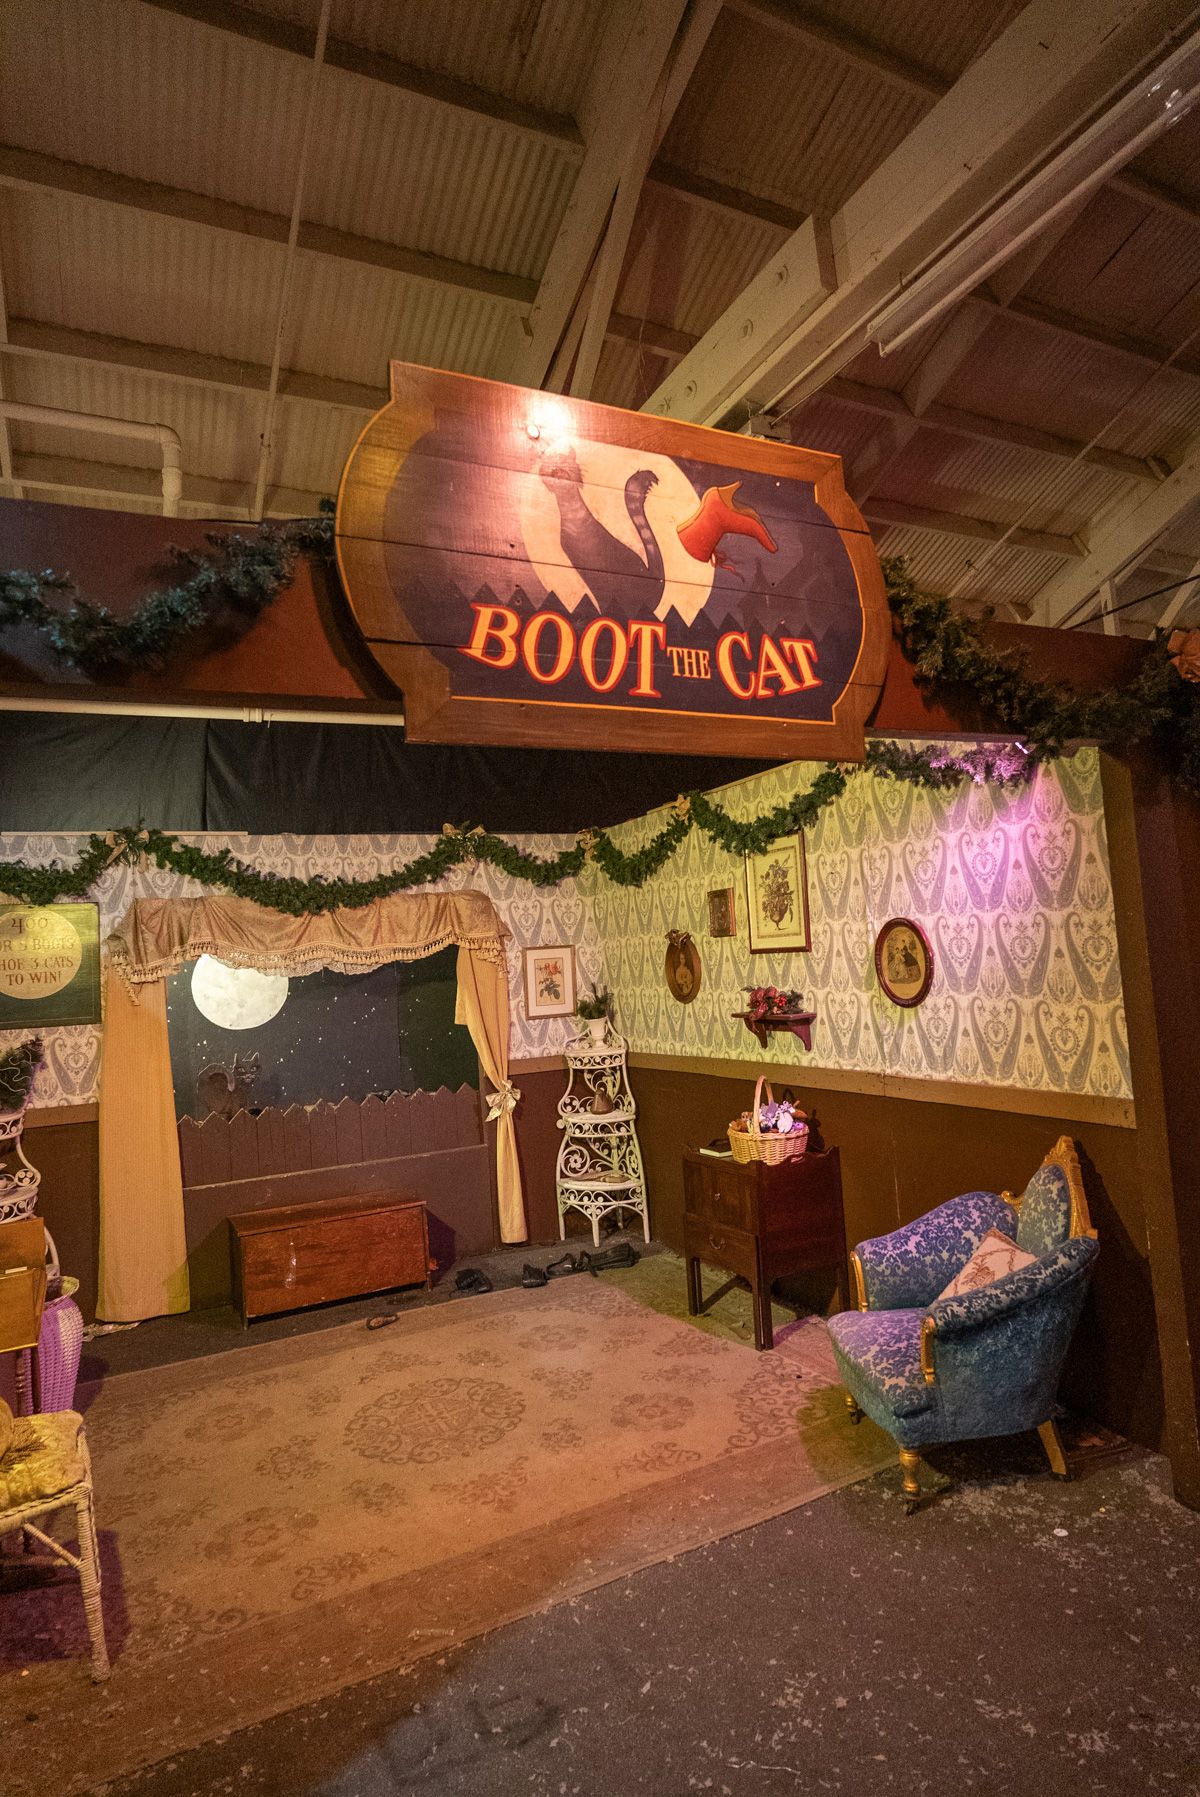 A Victorian-style Carnival Games booth with a sign that reads, "Boot the Cat."